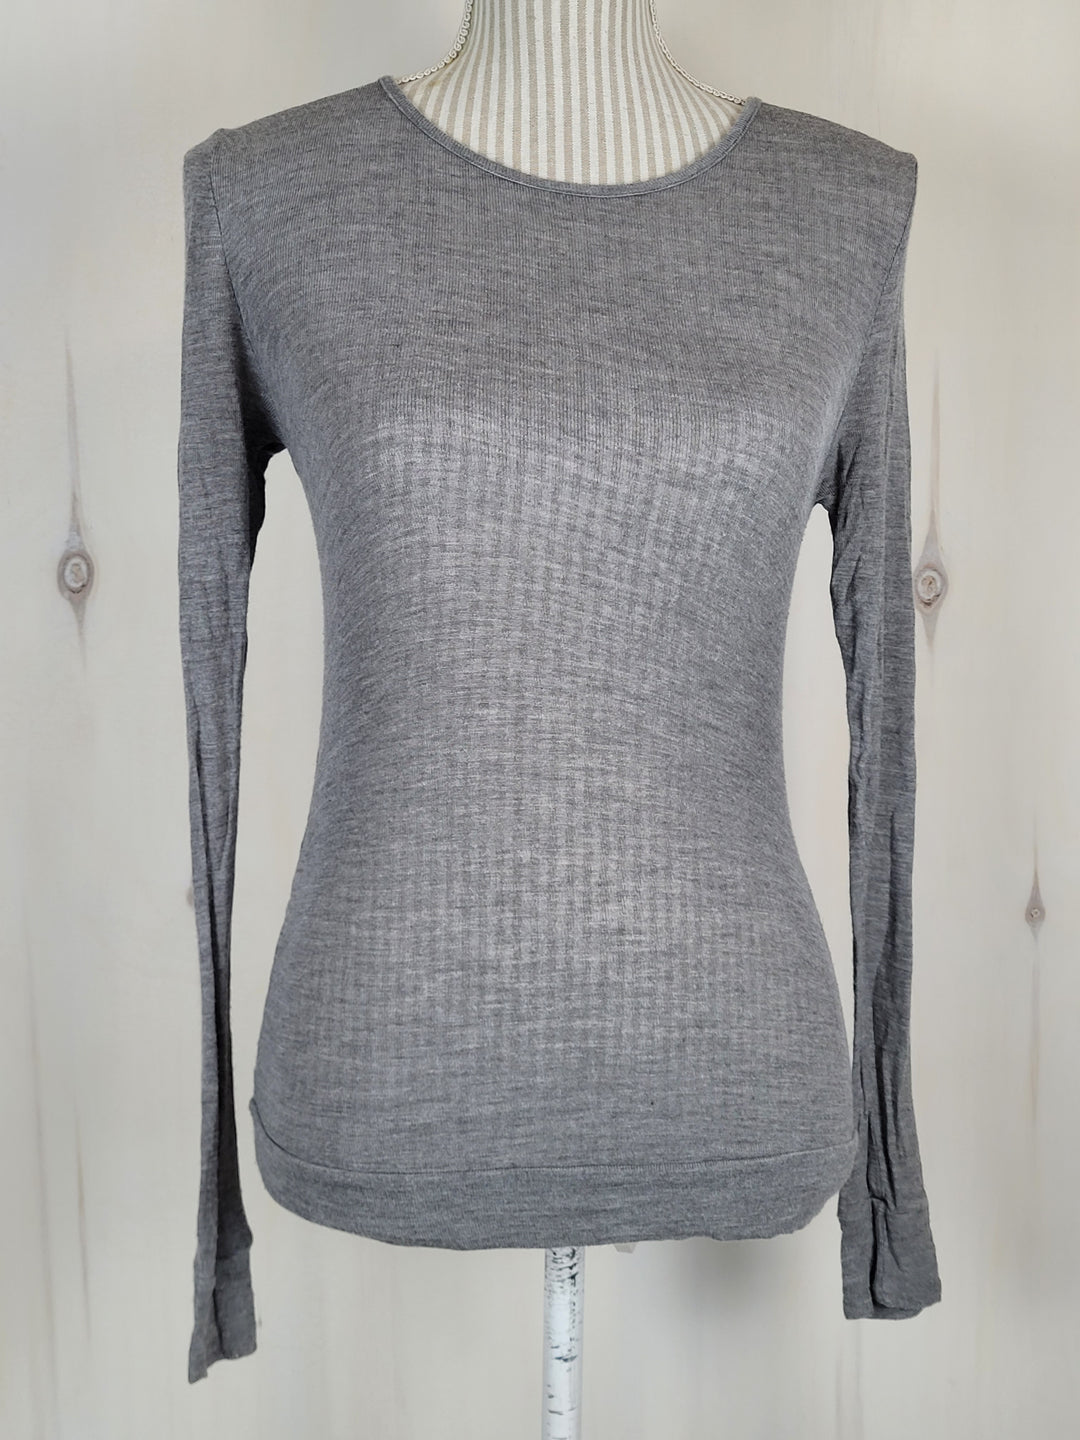 ROLLA COSTER GREY TOP WITH BLACK LACE BACK OPEN DETAIL LADIES MEDIUM EUC